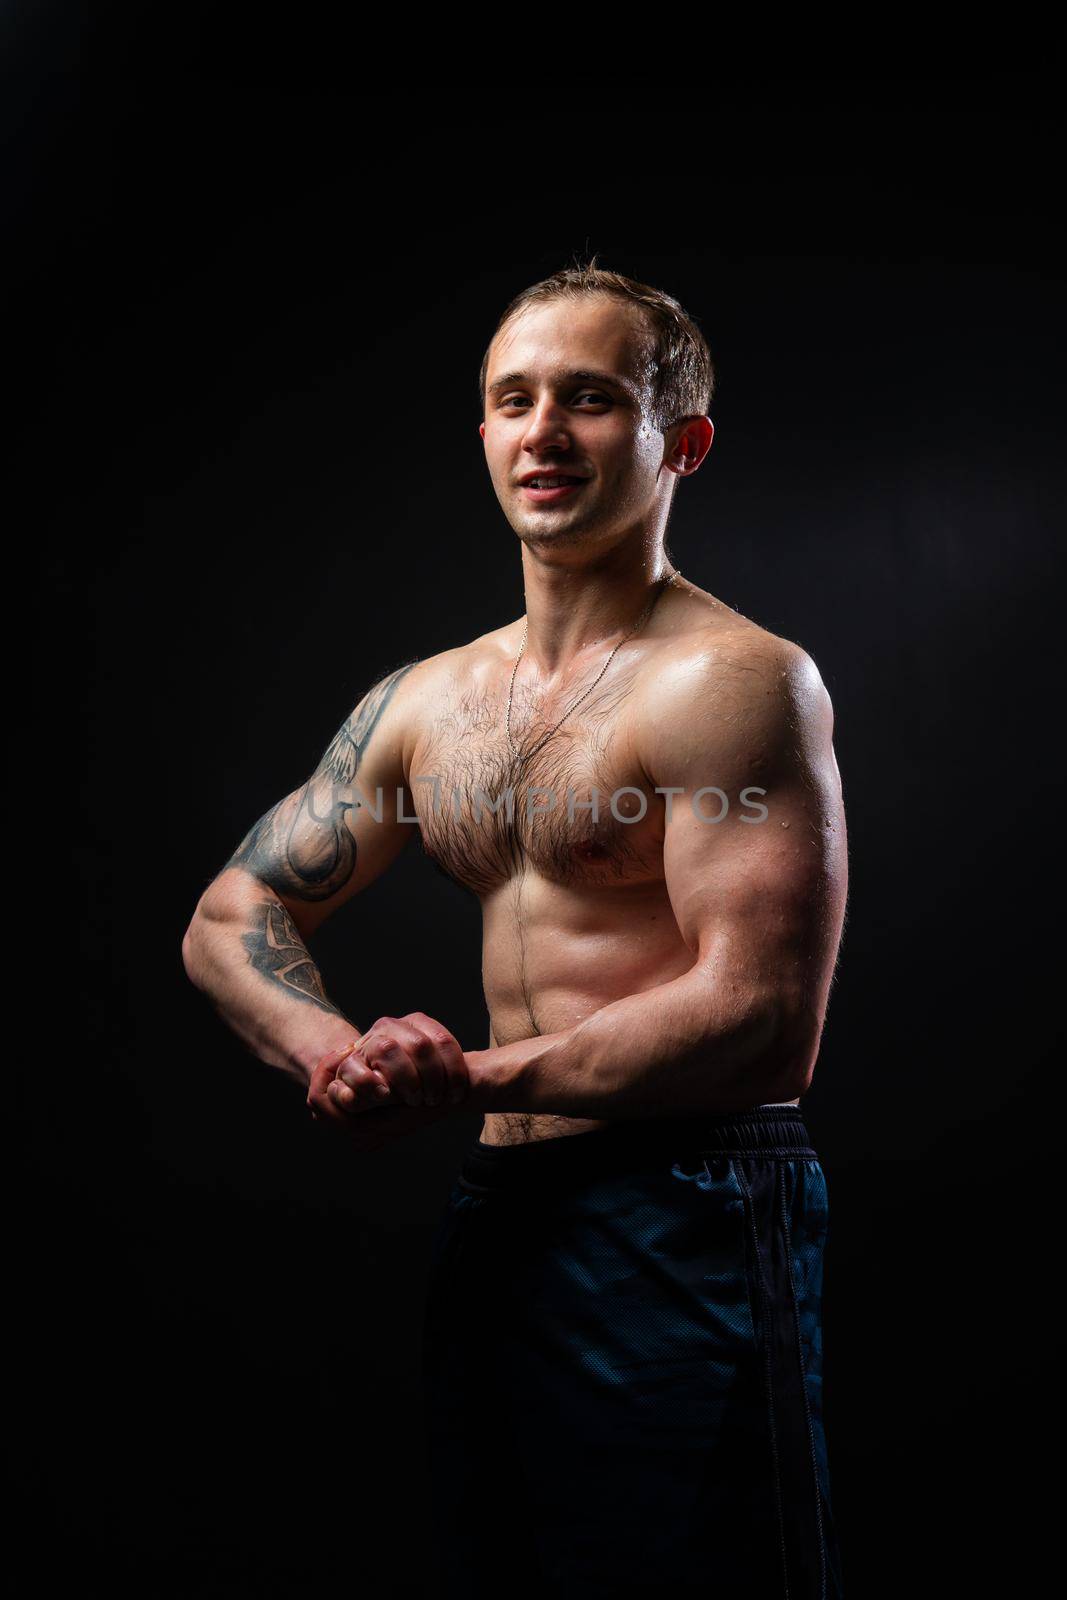 Man on black background keeps dumbbells pumped up in fitness biceps black, body muscular man lifting dumbbell, shirtless Attractive handsome guy fit View from the bottom up good press beautiful muscles hairy chest charisma